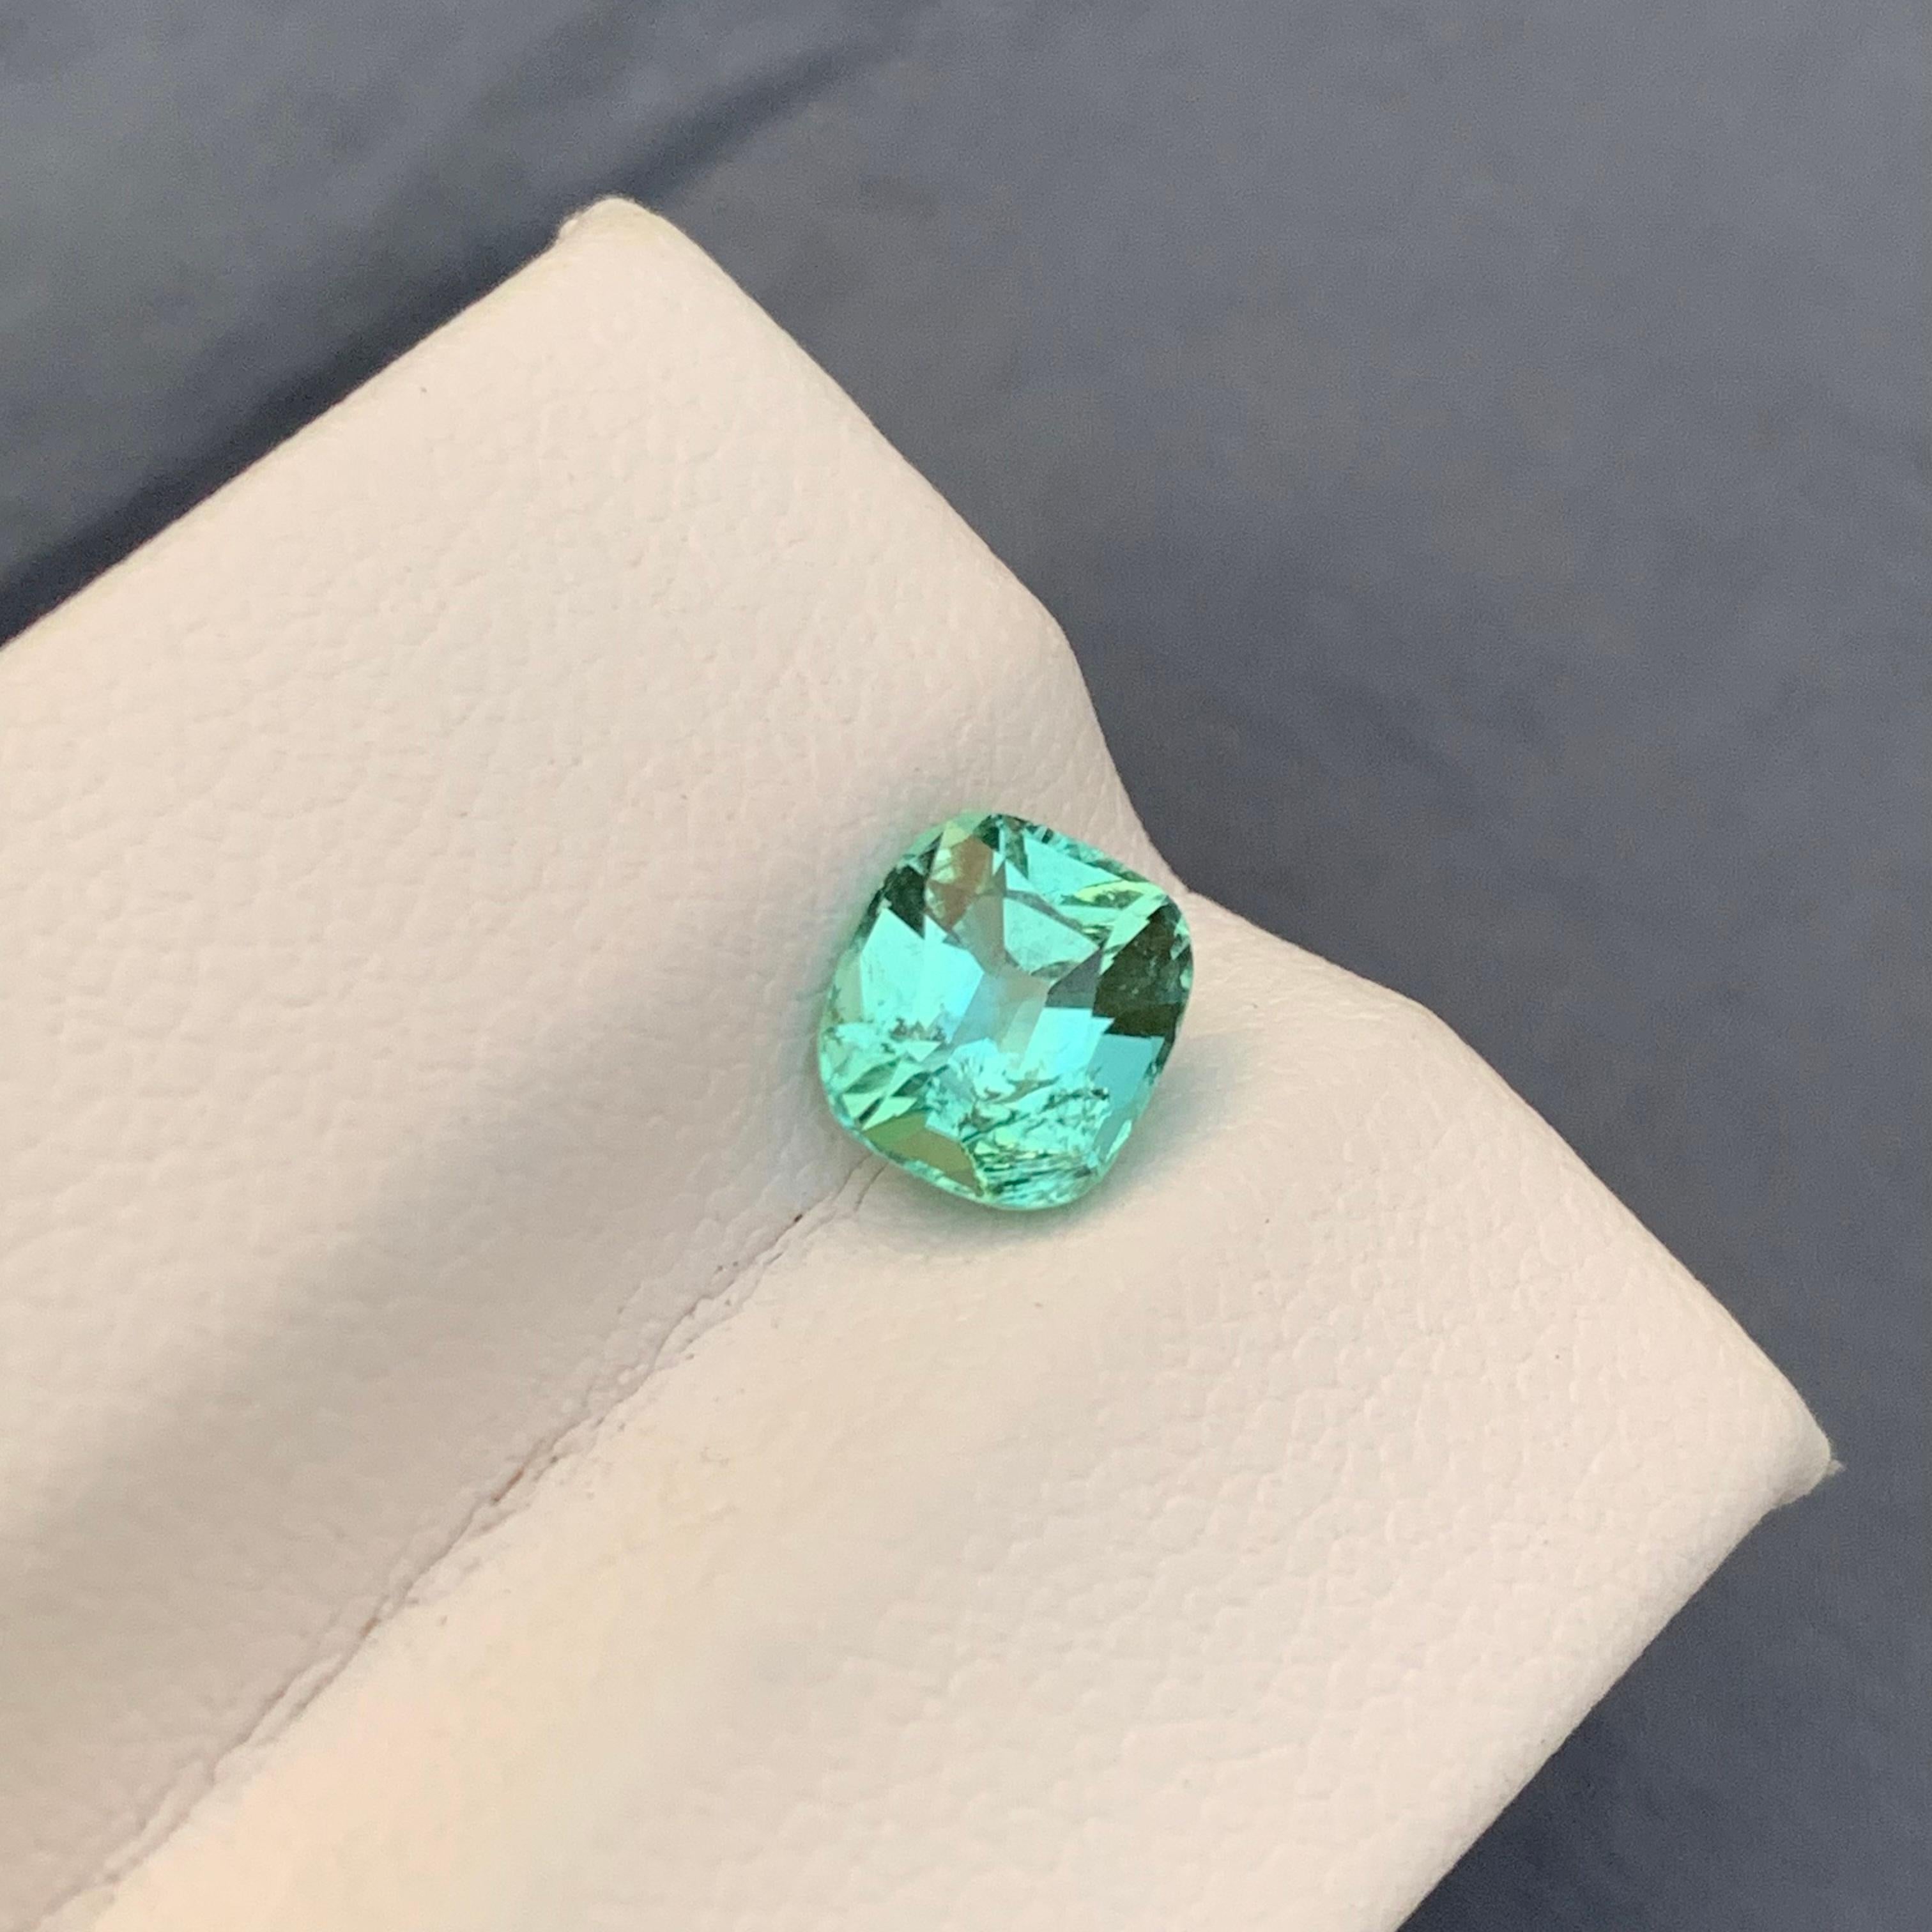 Faceted Tourmaline 
Weight: 1.50 Carats 
Dimension: 7x6.4x4.7 Mm
Origin: Kunar Afghanistan 
Shape: Cushion 
Color: Mint Green 
Treatment: Non
Tourmaline is a diverse and popular gemstone known for its wide range of colors and metaphysical